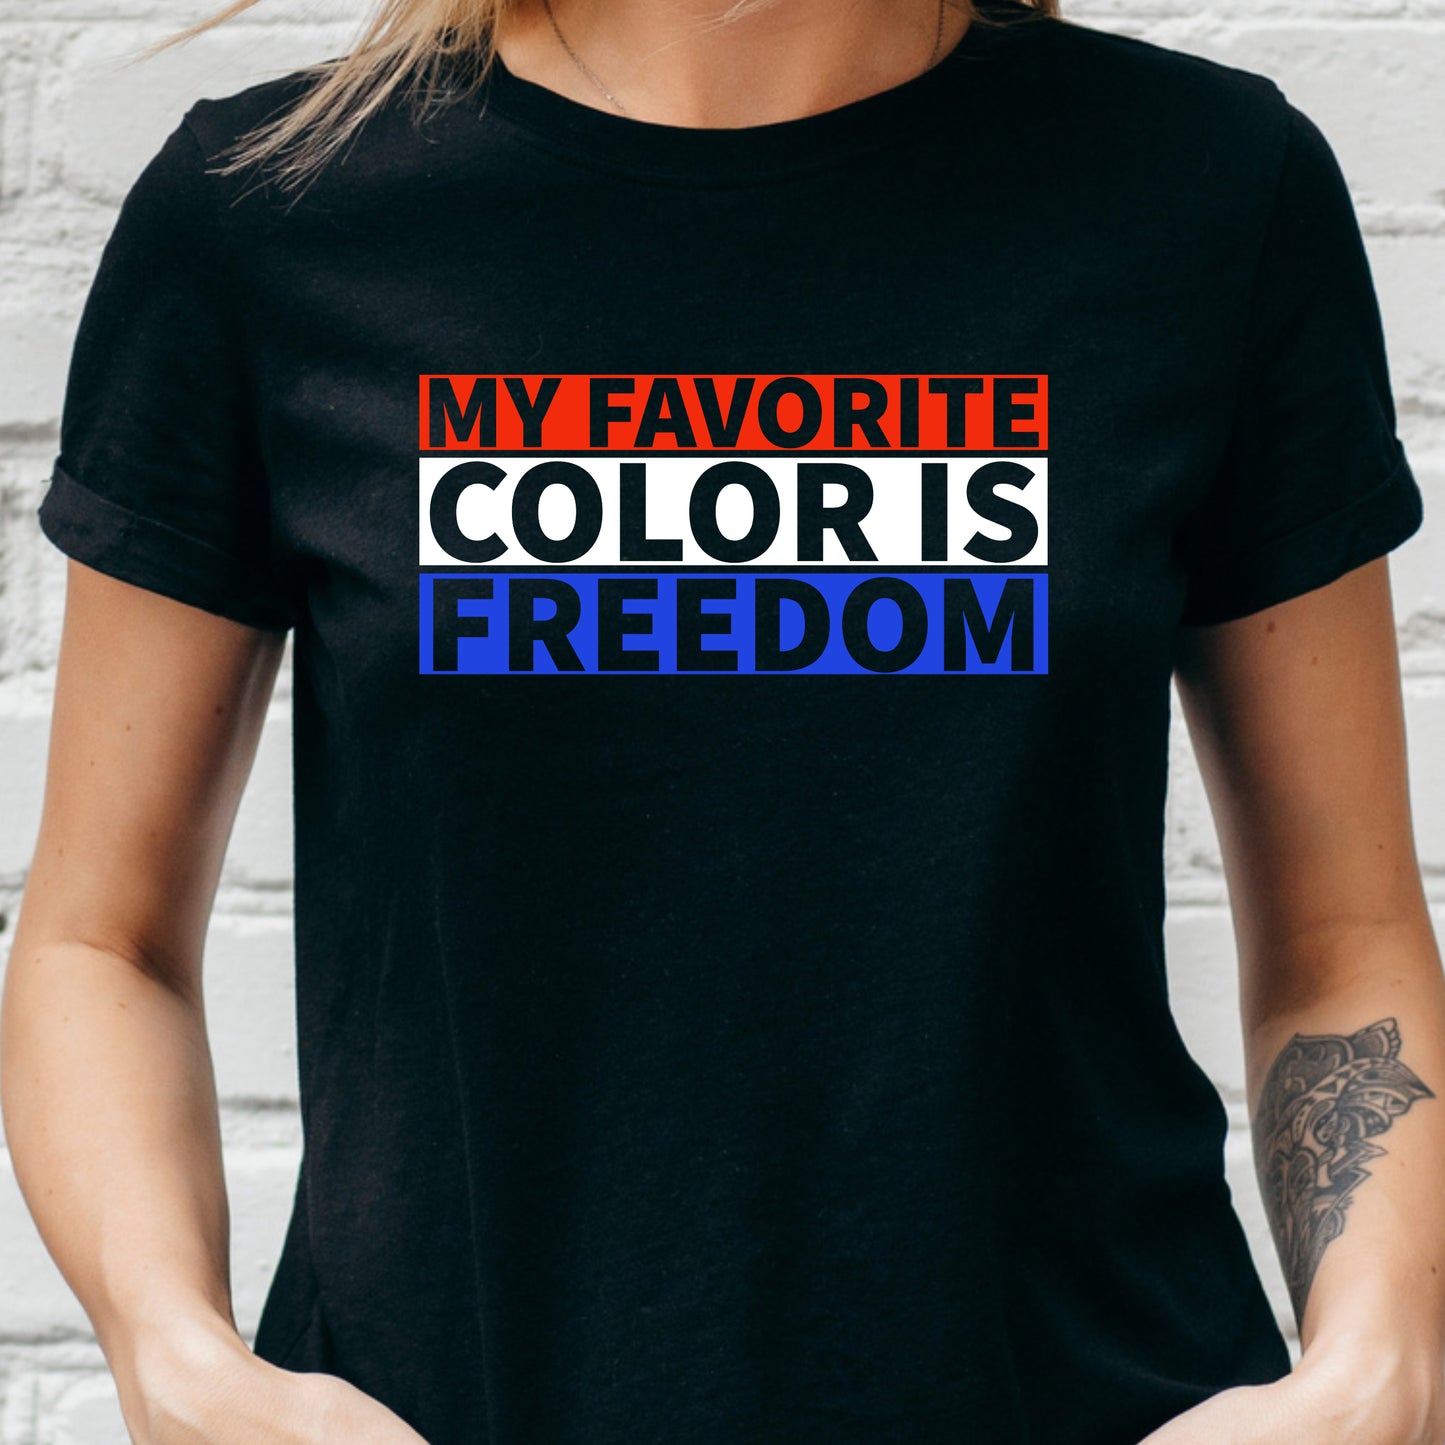 Freedom T-Shirt For Conservative TShirt For Patriot T Shirt For Independence Day Shirt For Patriotic Gift For Freedom Lover